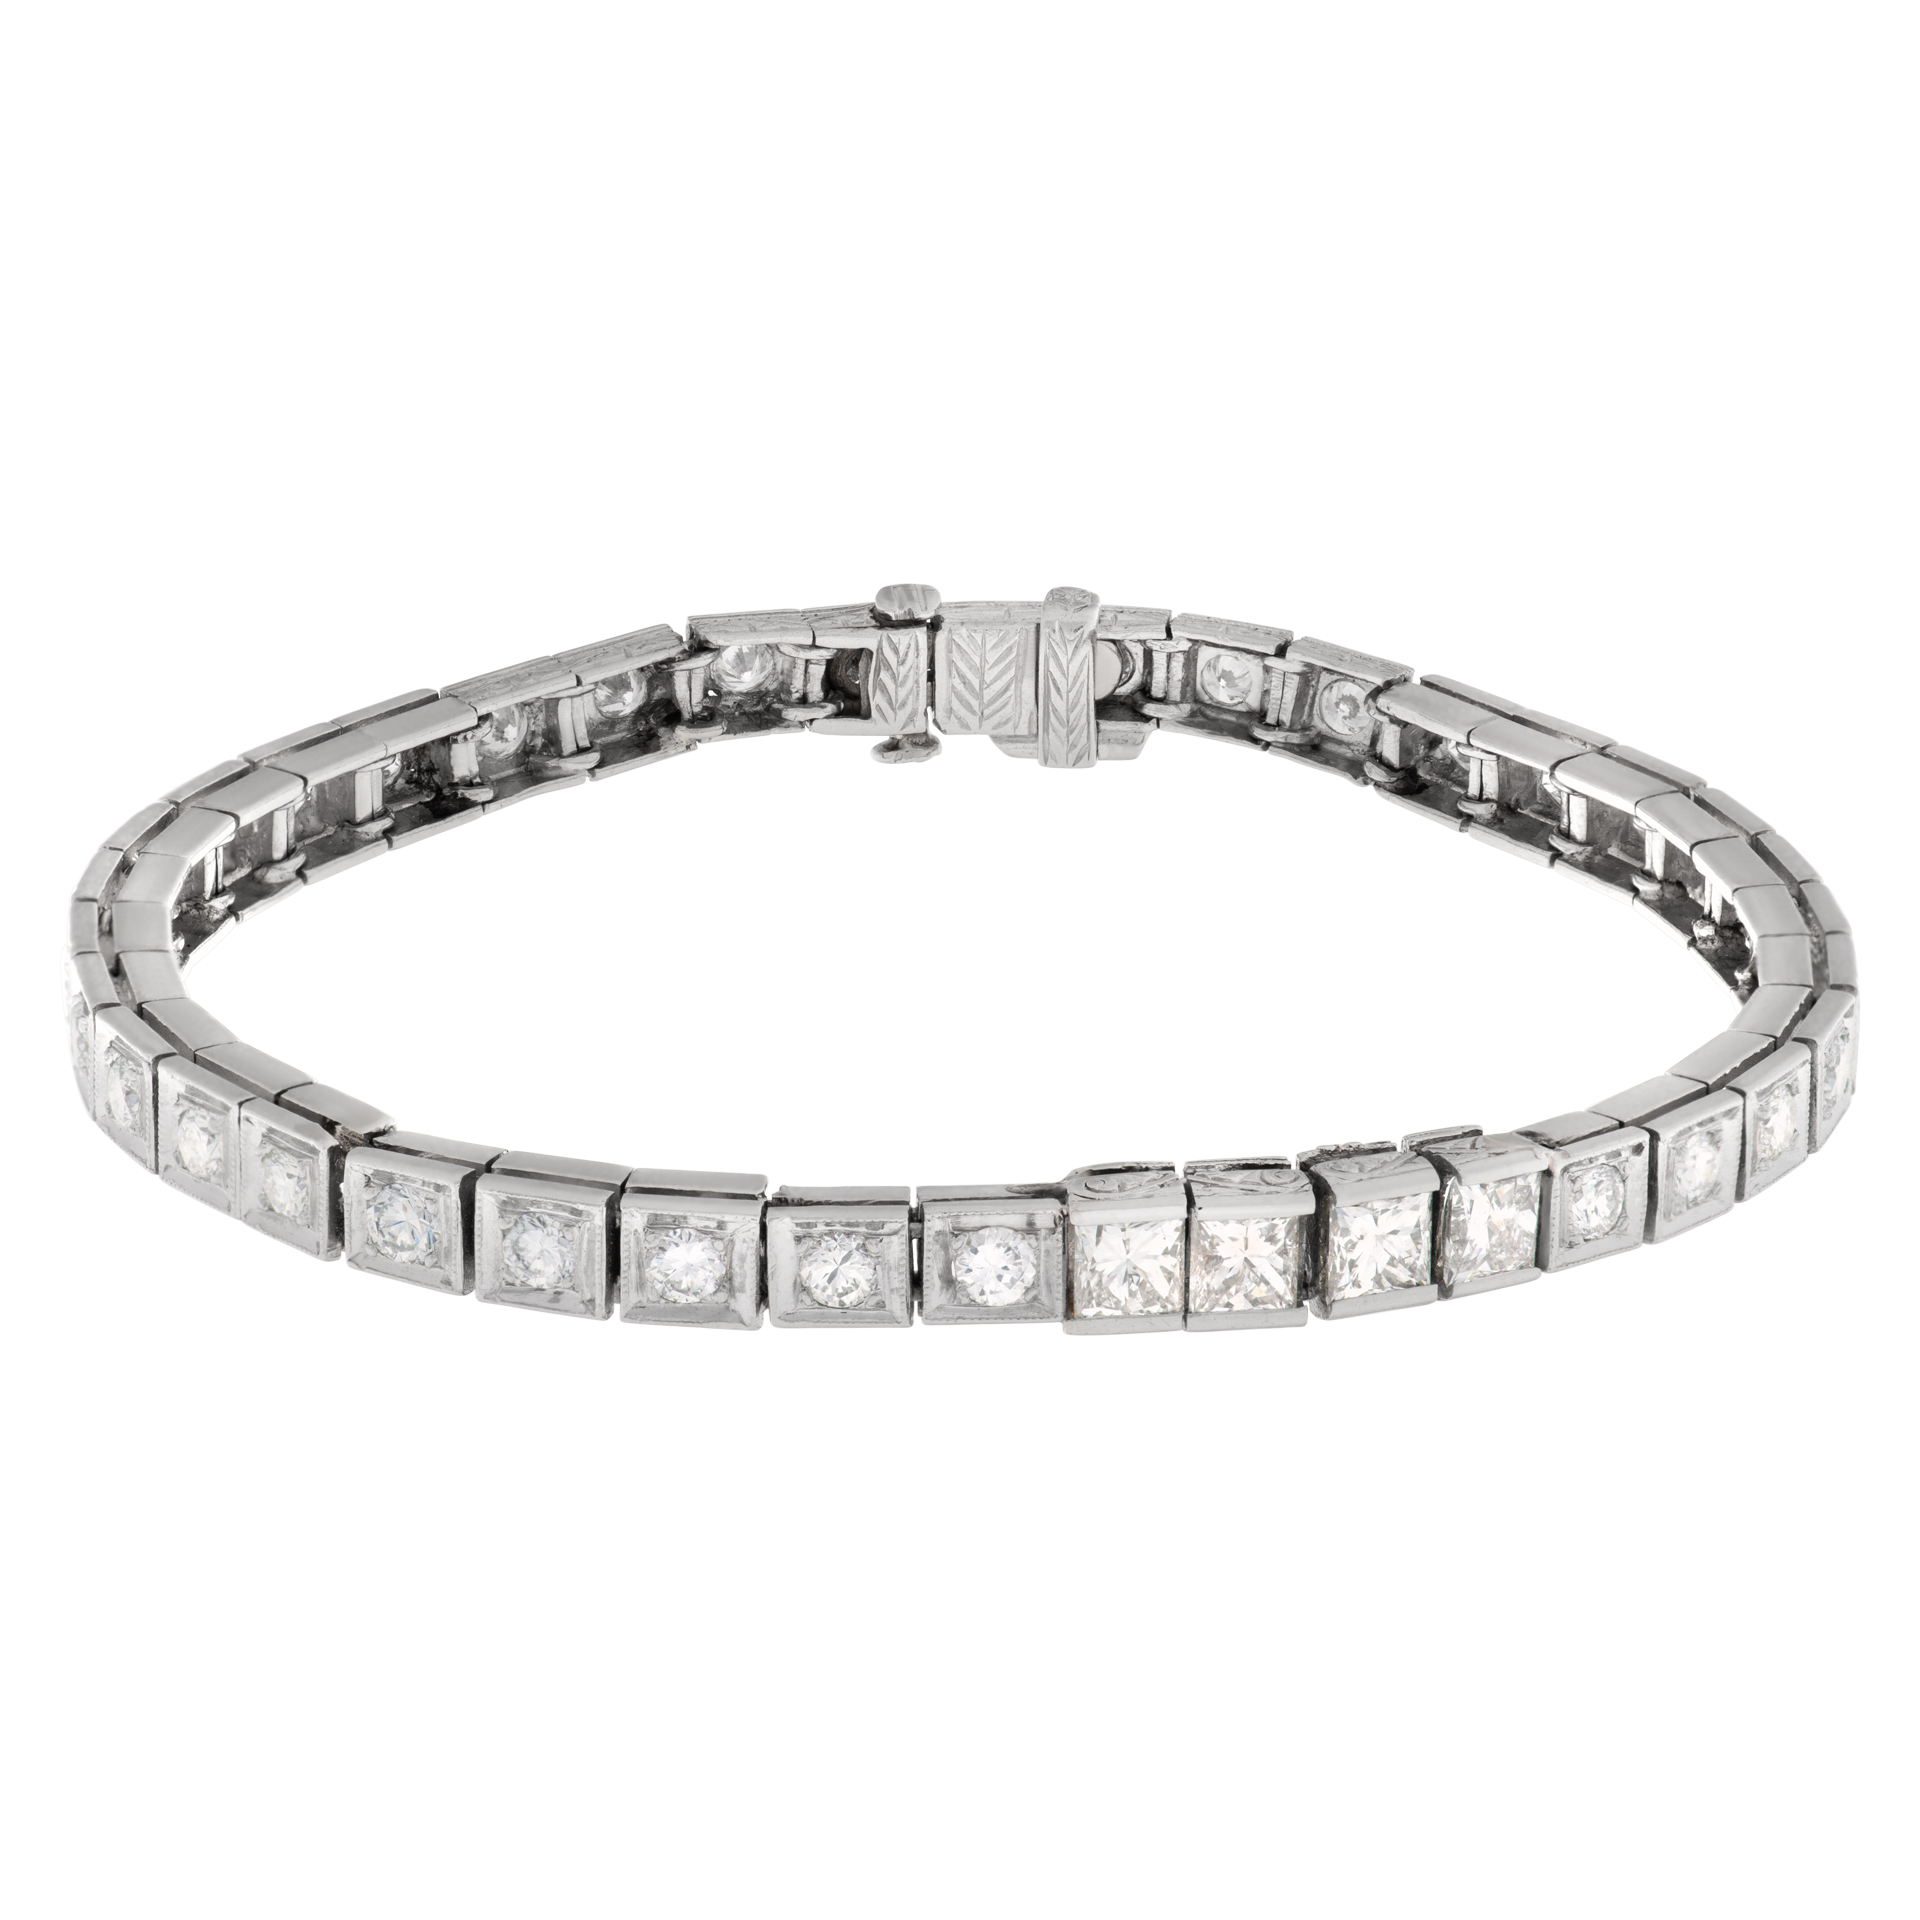 Diamond line bracelet with approximately 2.5 carats in diamonds in platinum